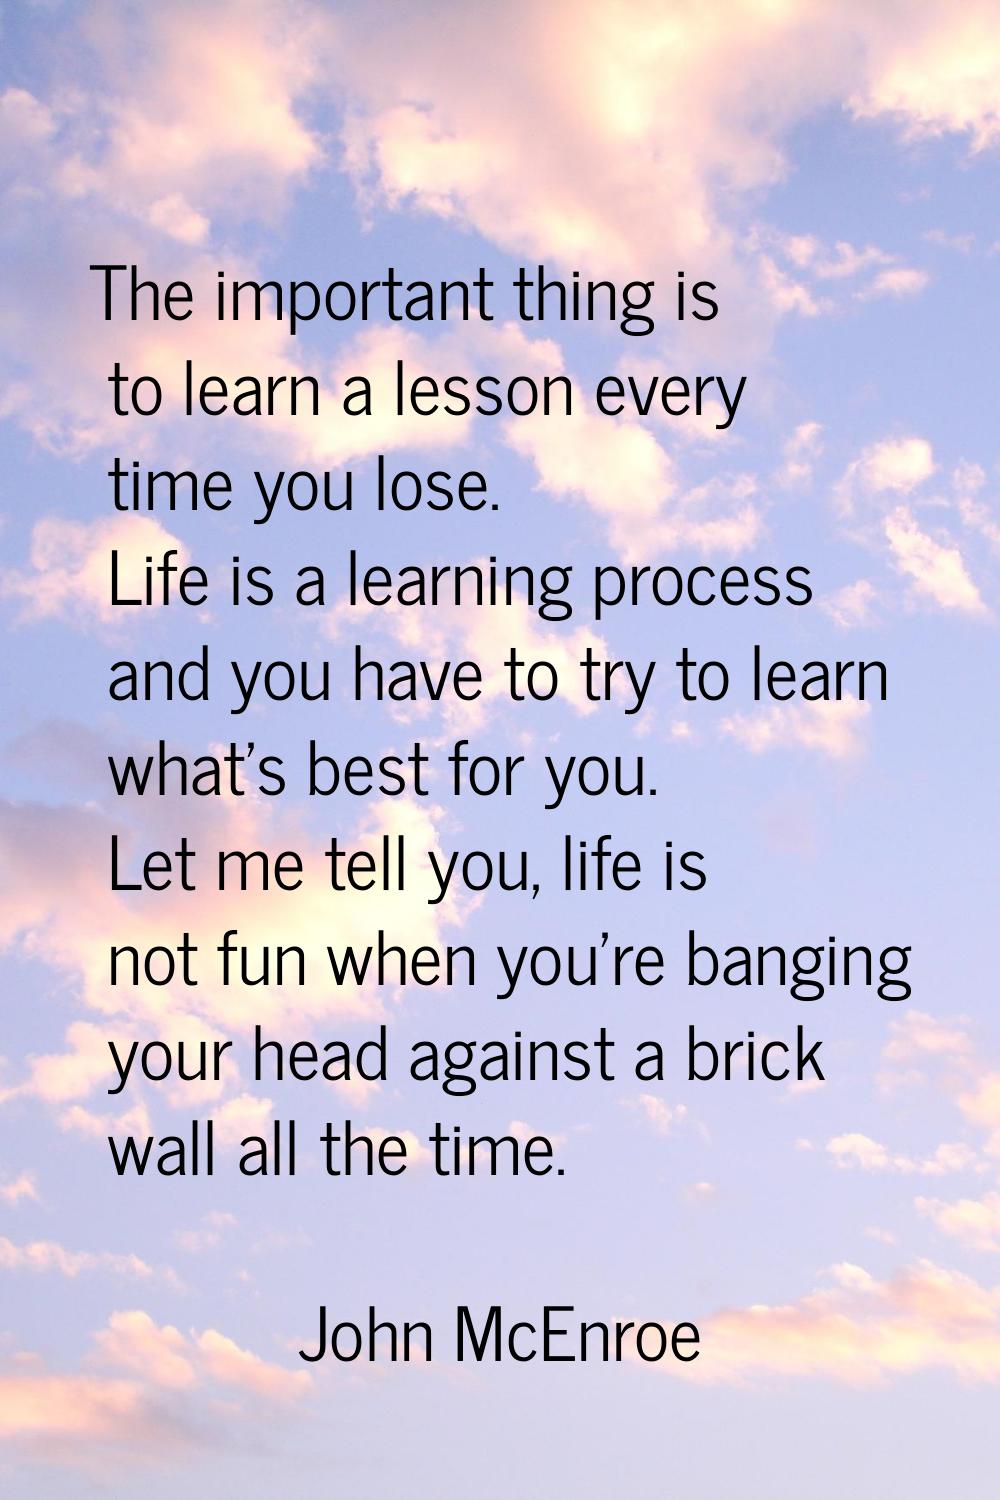 The important thing is to learn a lesson every time you lose. Life is a learning process and you ha